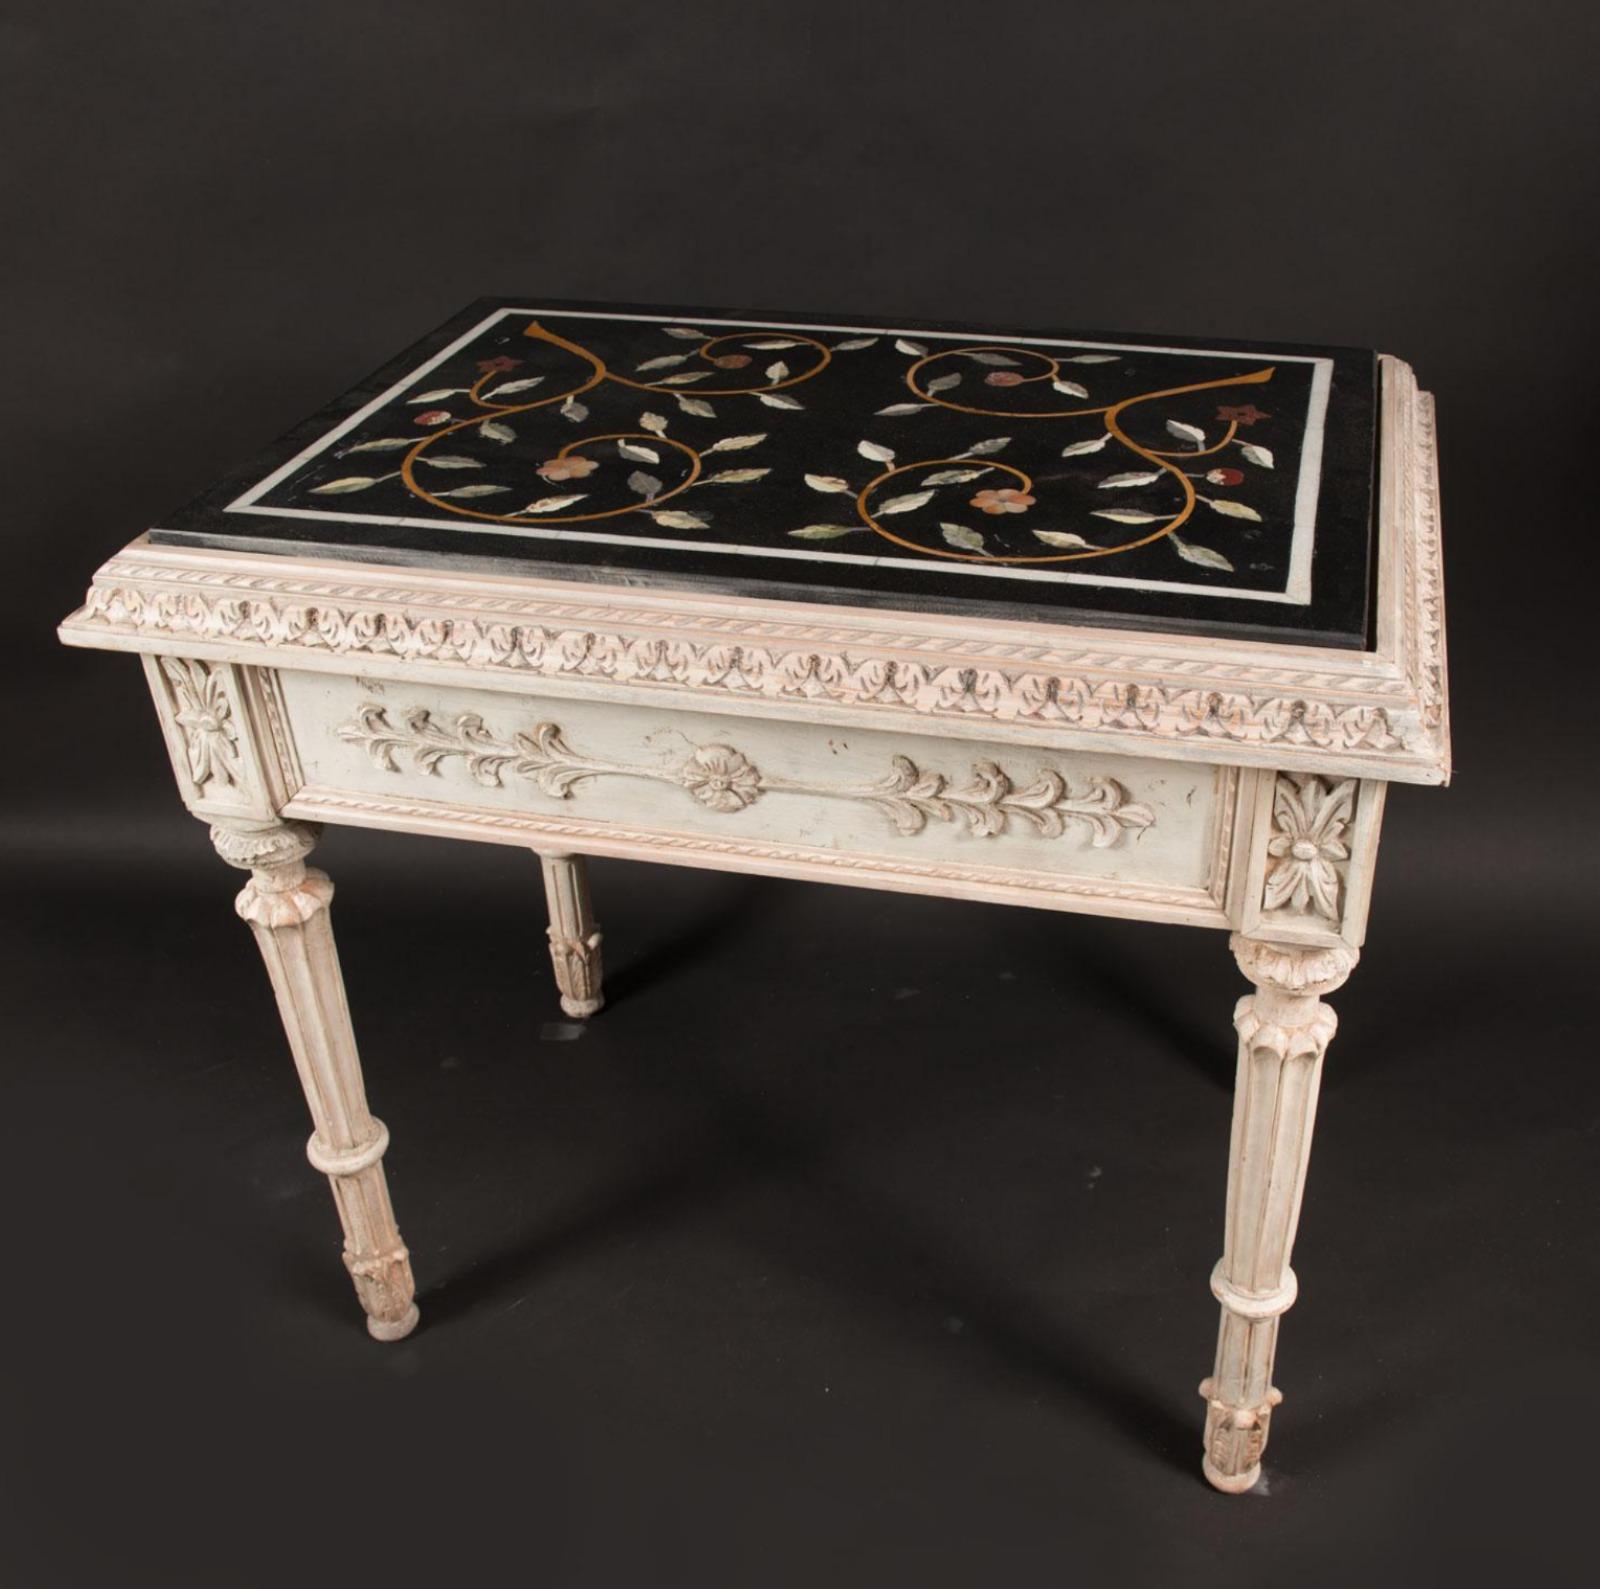 Hand-Crafted Italian Pietra Dura Table, 19th Century For Sale